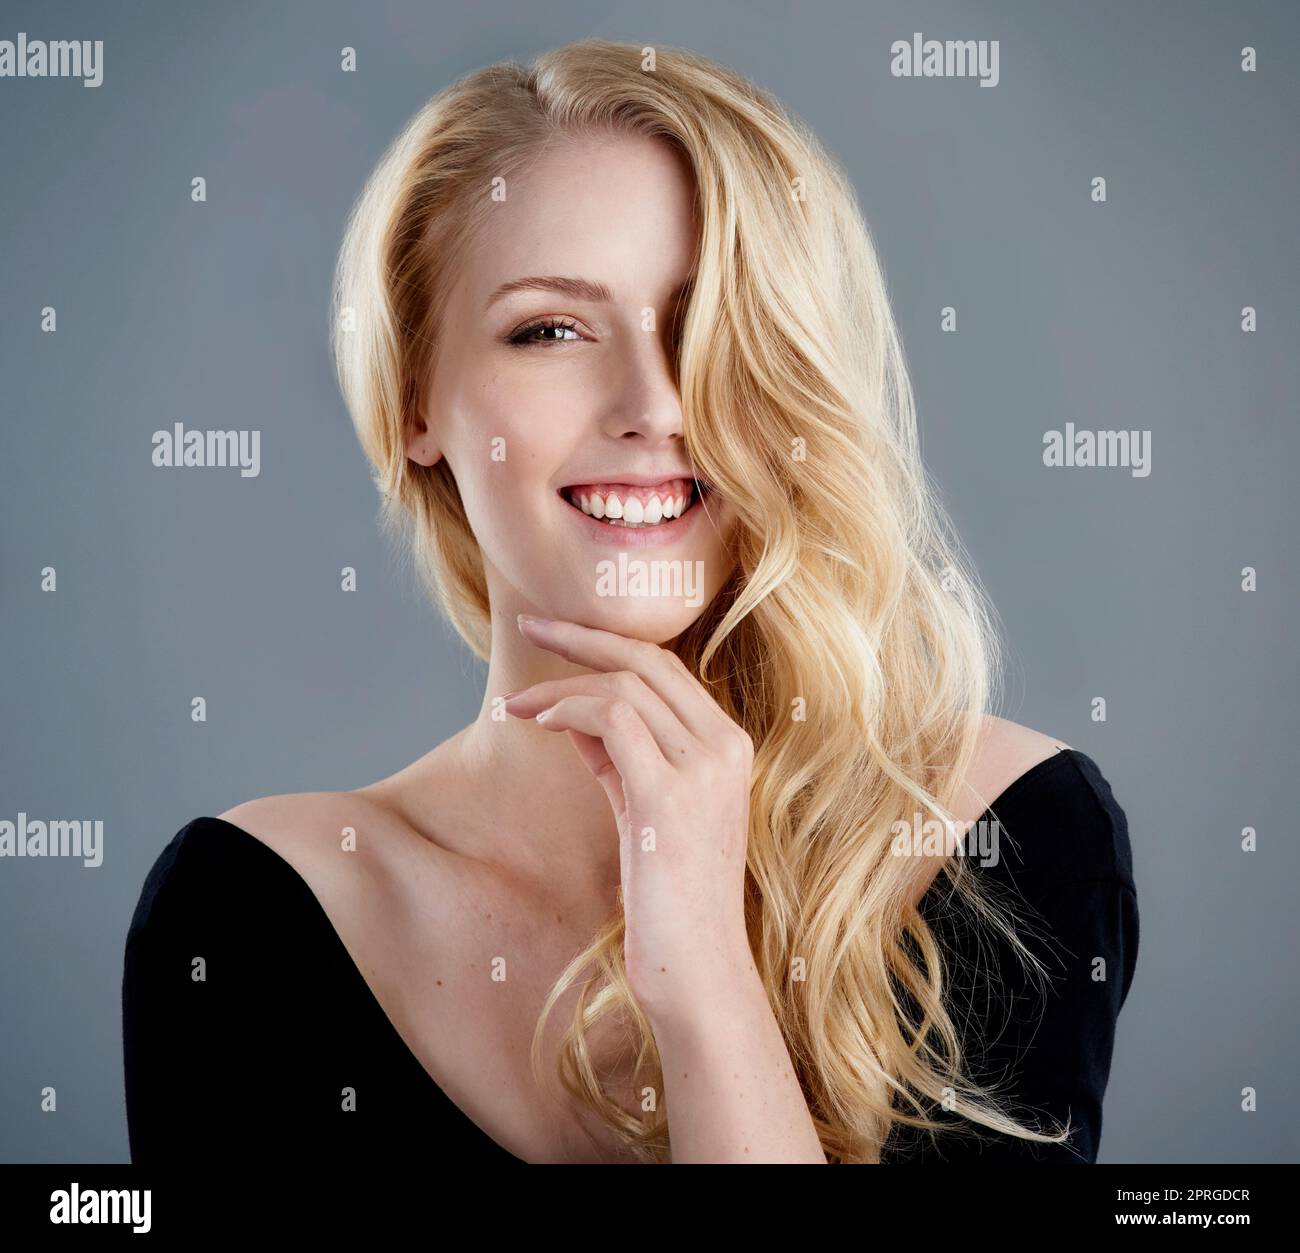 Confidence that matches her beauty. Studio portrait of an attractive young woman with beautiful long blonde hair posing against a gray background. Stock Photo